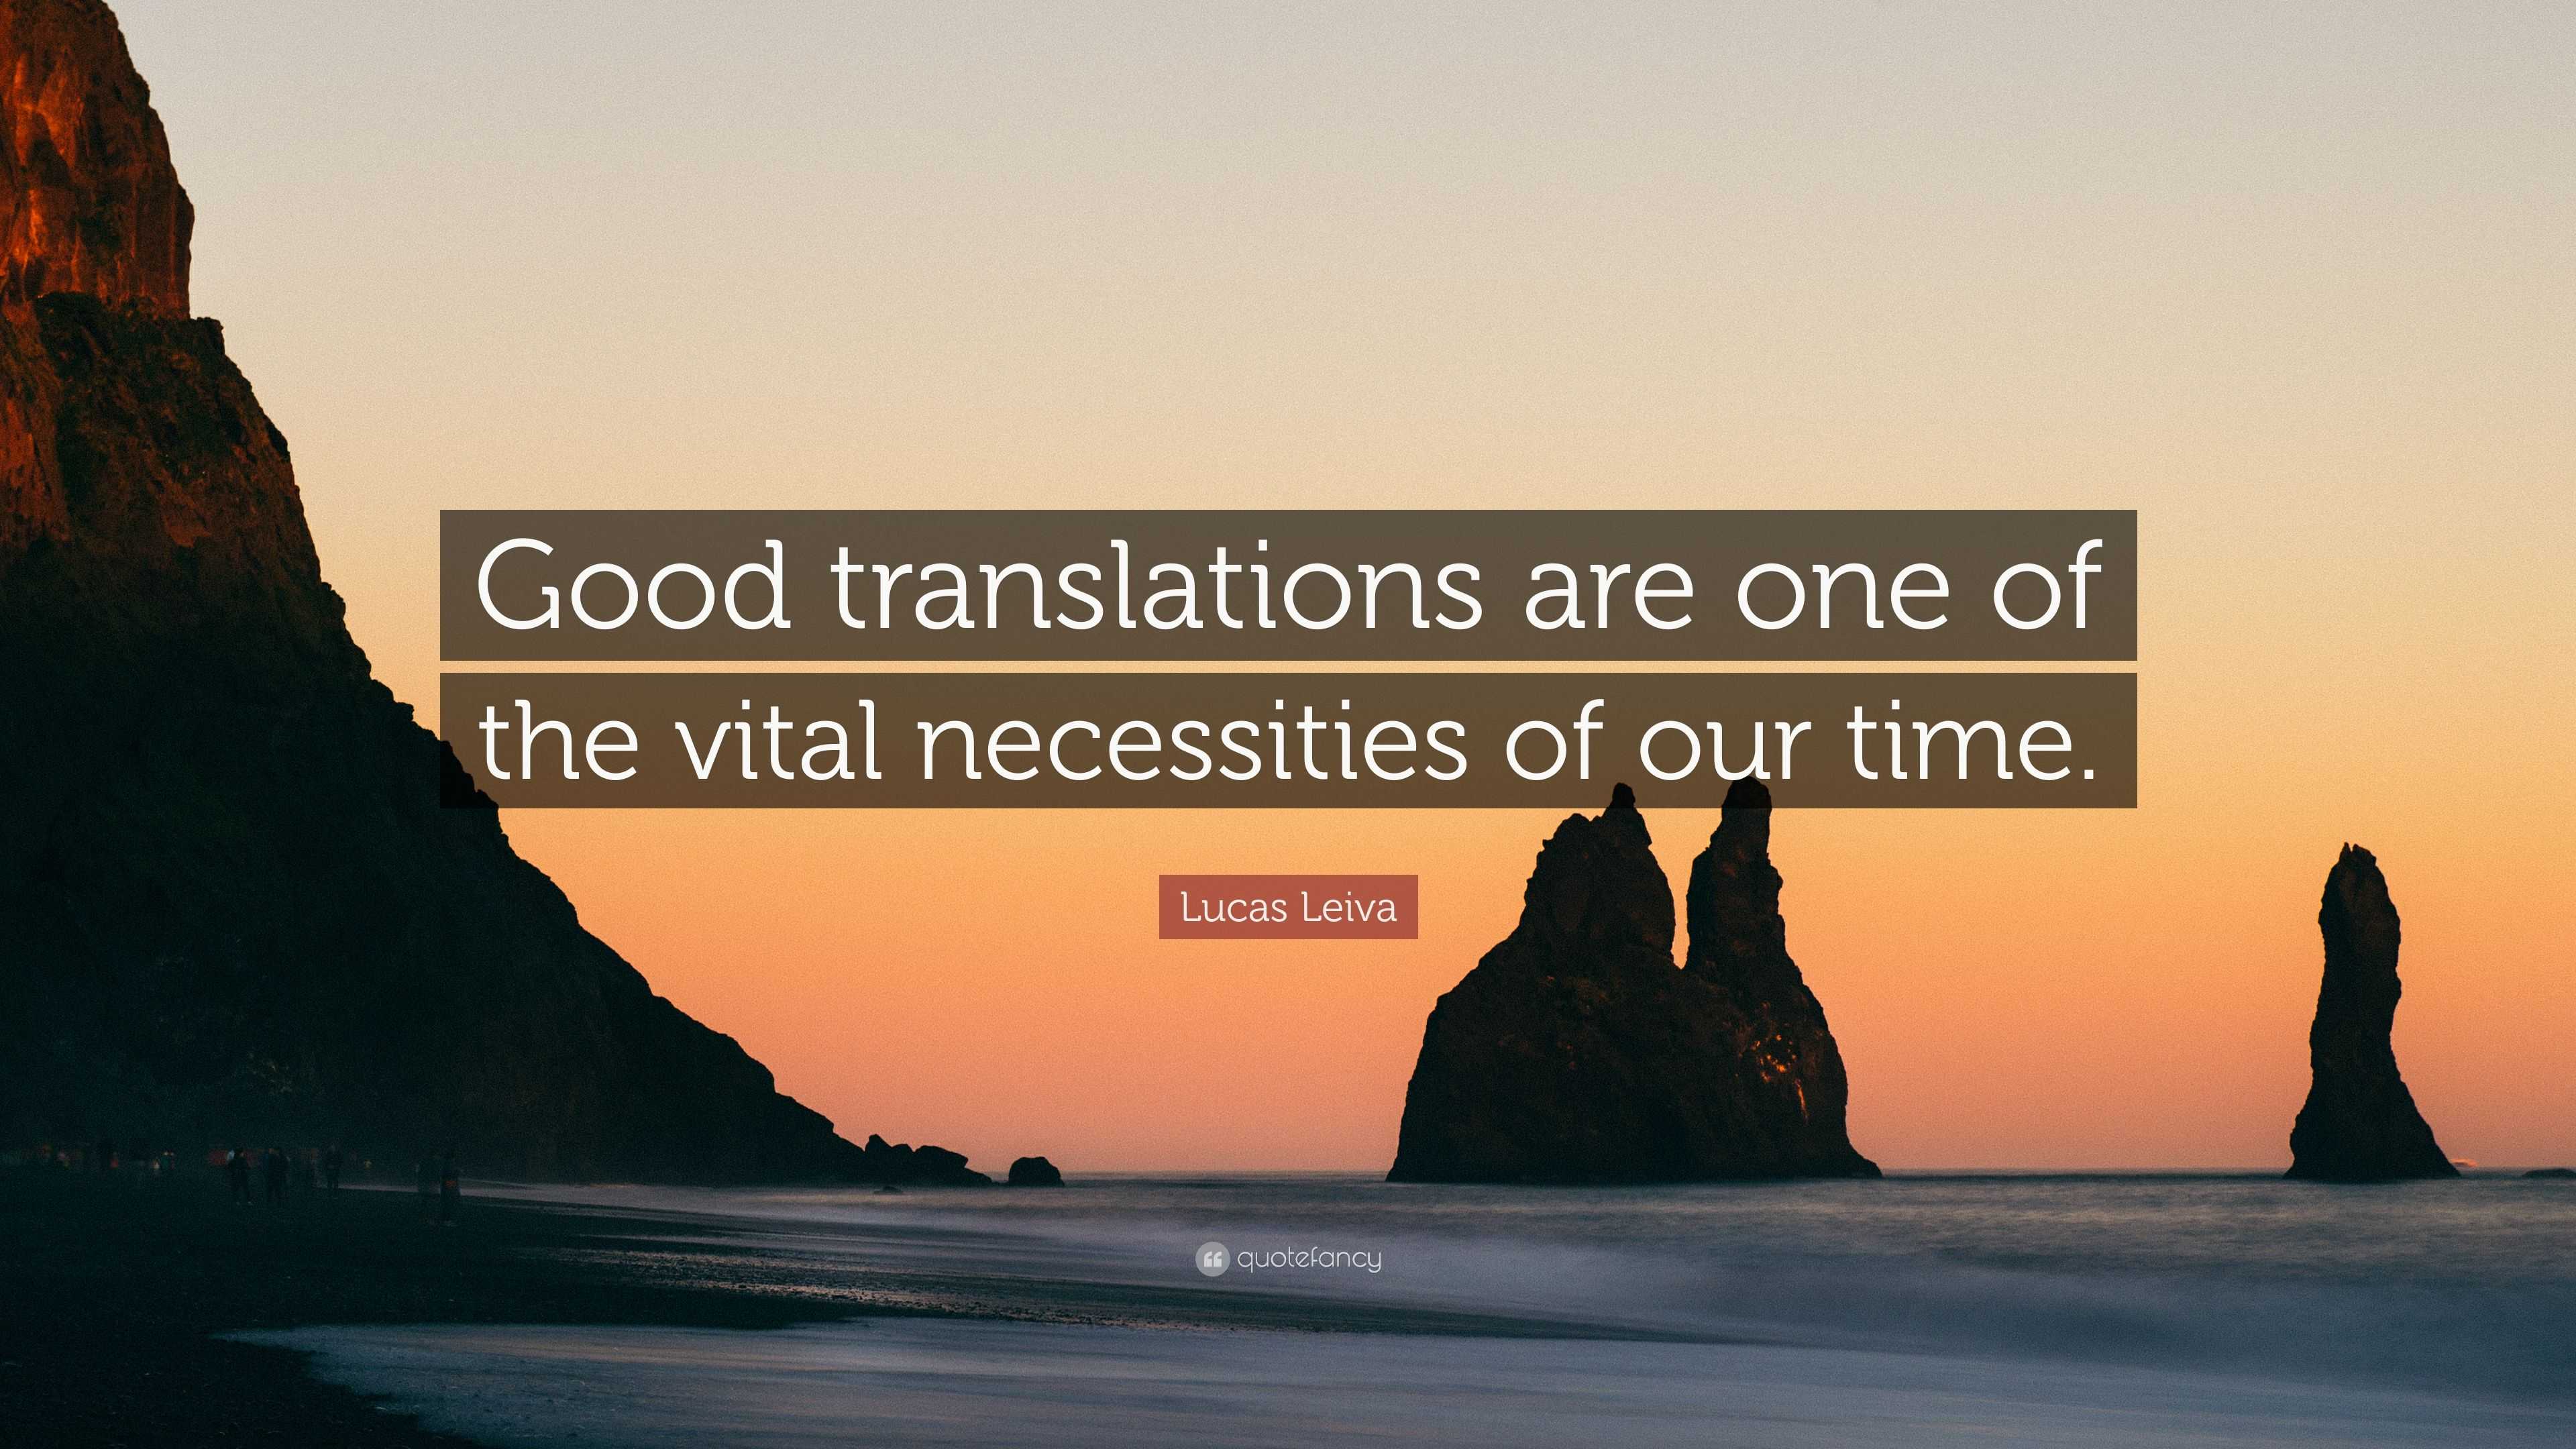 Lucas Leiva Quote: “Good translations are one of the vital necessities of  our time.”